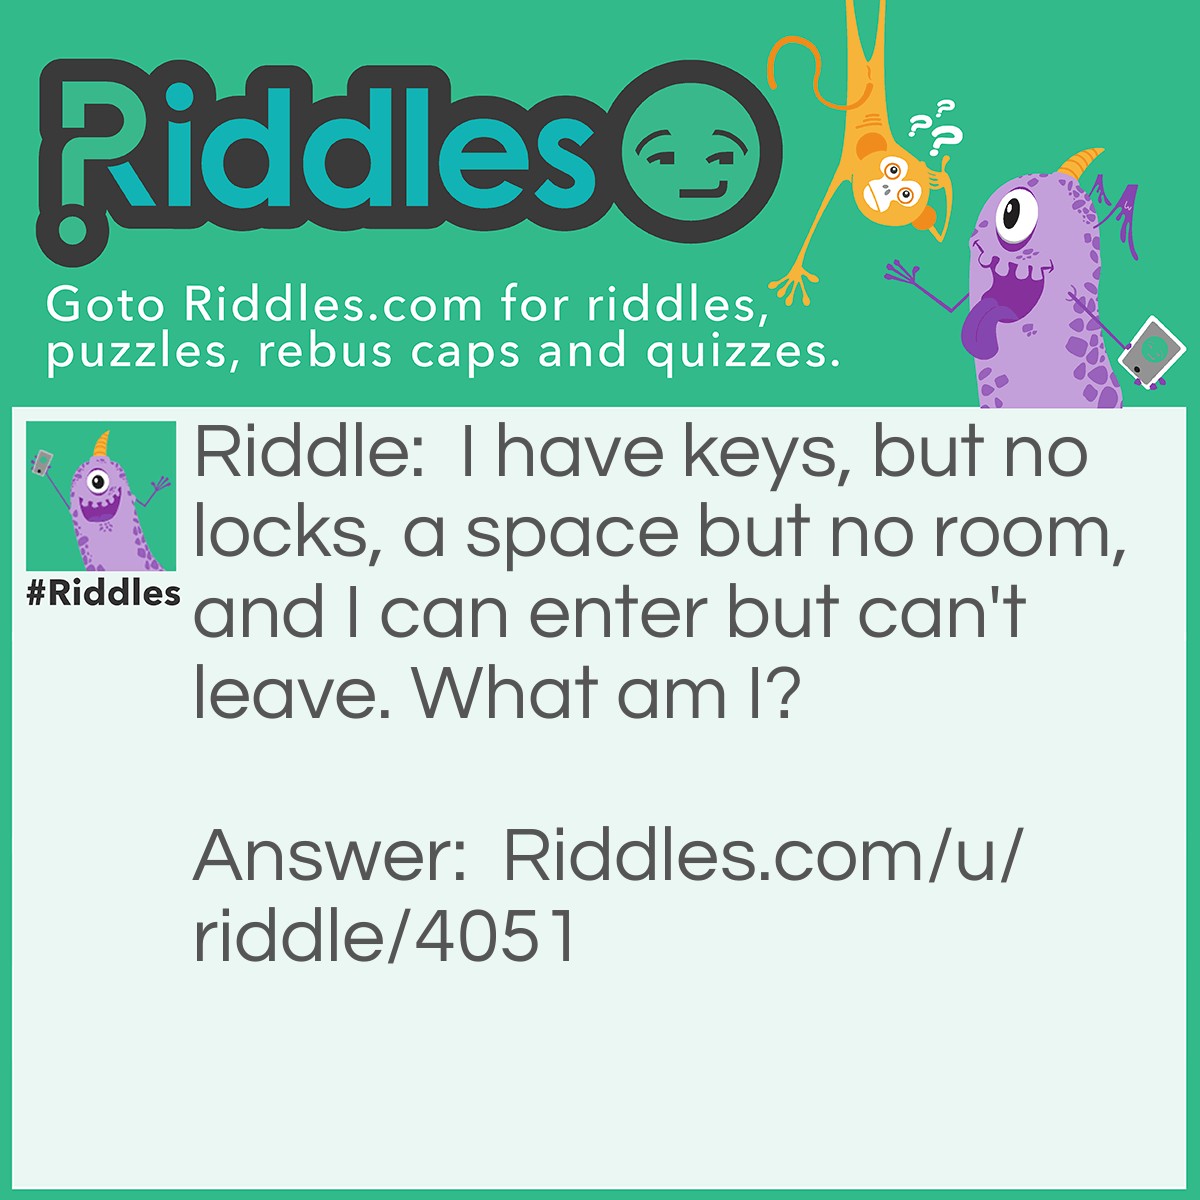 Riddle: I have keys, but no locks, a space but no room, and I can enter but can't leave. What am I? Answer: A keyboard.